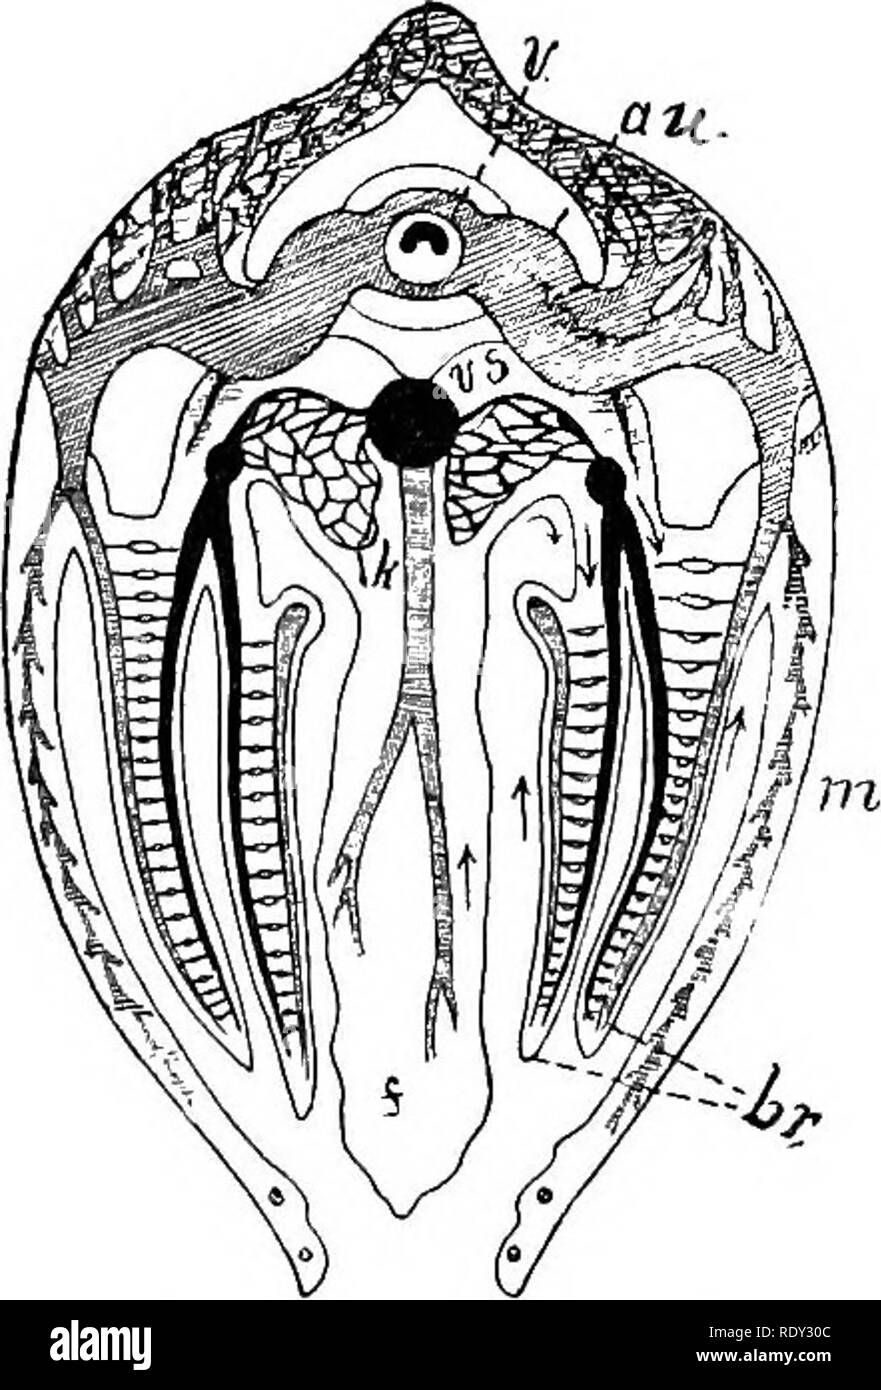 . Outlines of the comparative physiology and morphology of animals. Anatomy, Comparative; Physiology, Comparative. 402 PHYSIOLOGY AND MORPHOLOGY OF ANIMALS. to carry away excretions. In siphonated bivalves, as already seen, the currents pass down one siphon and out the other. Circulation: Heart.—In the longitudinal section (Fig. 280) H is the heart, through which runs the intestine, i, on its way to the vent. The heart consists of one ven- tricle, and usually of two auricles. The relation of the heart to the gills is seen in Fig. 282. The blood from the ventricle is thrown. Please note that th Stock Photo